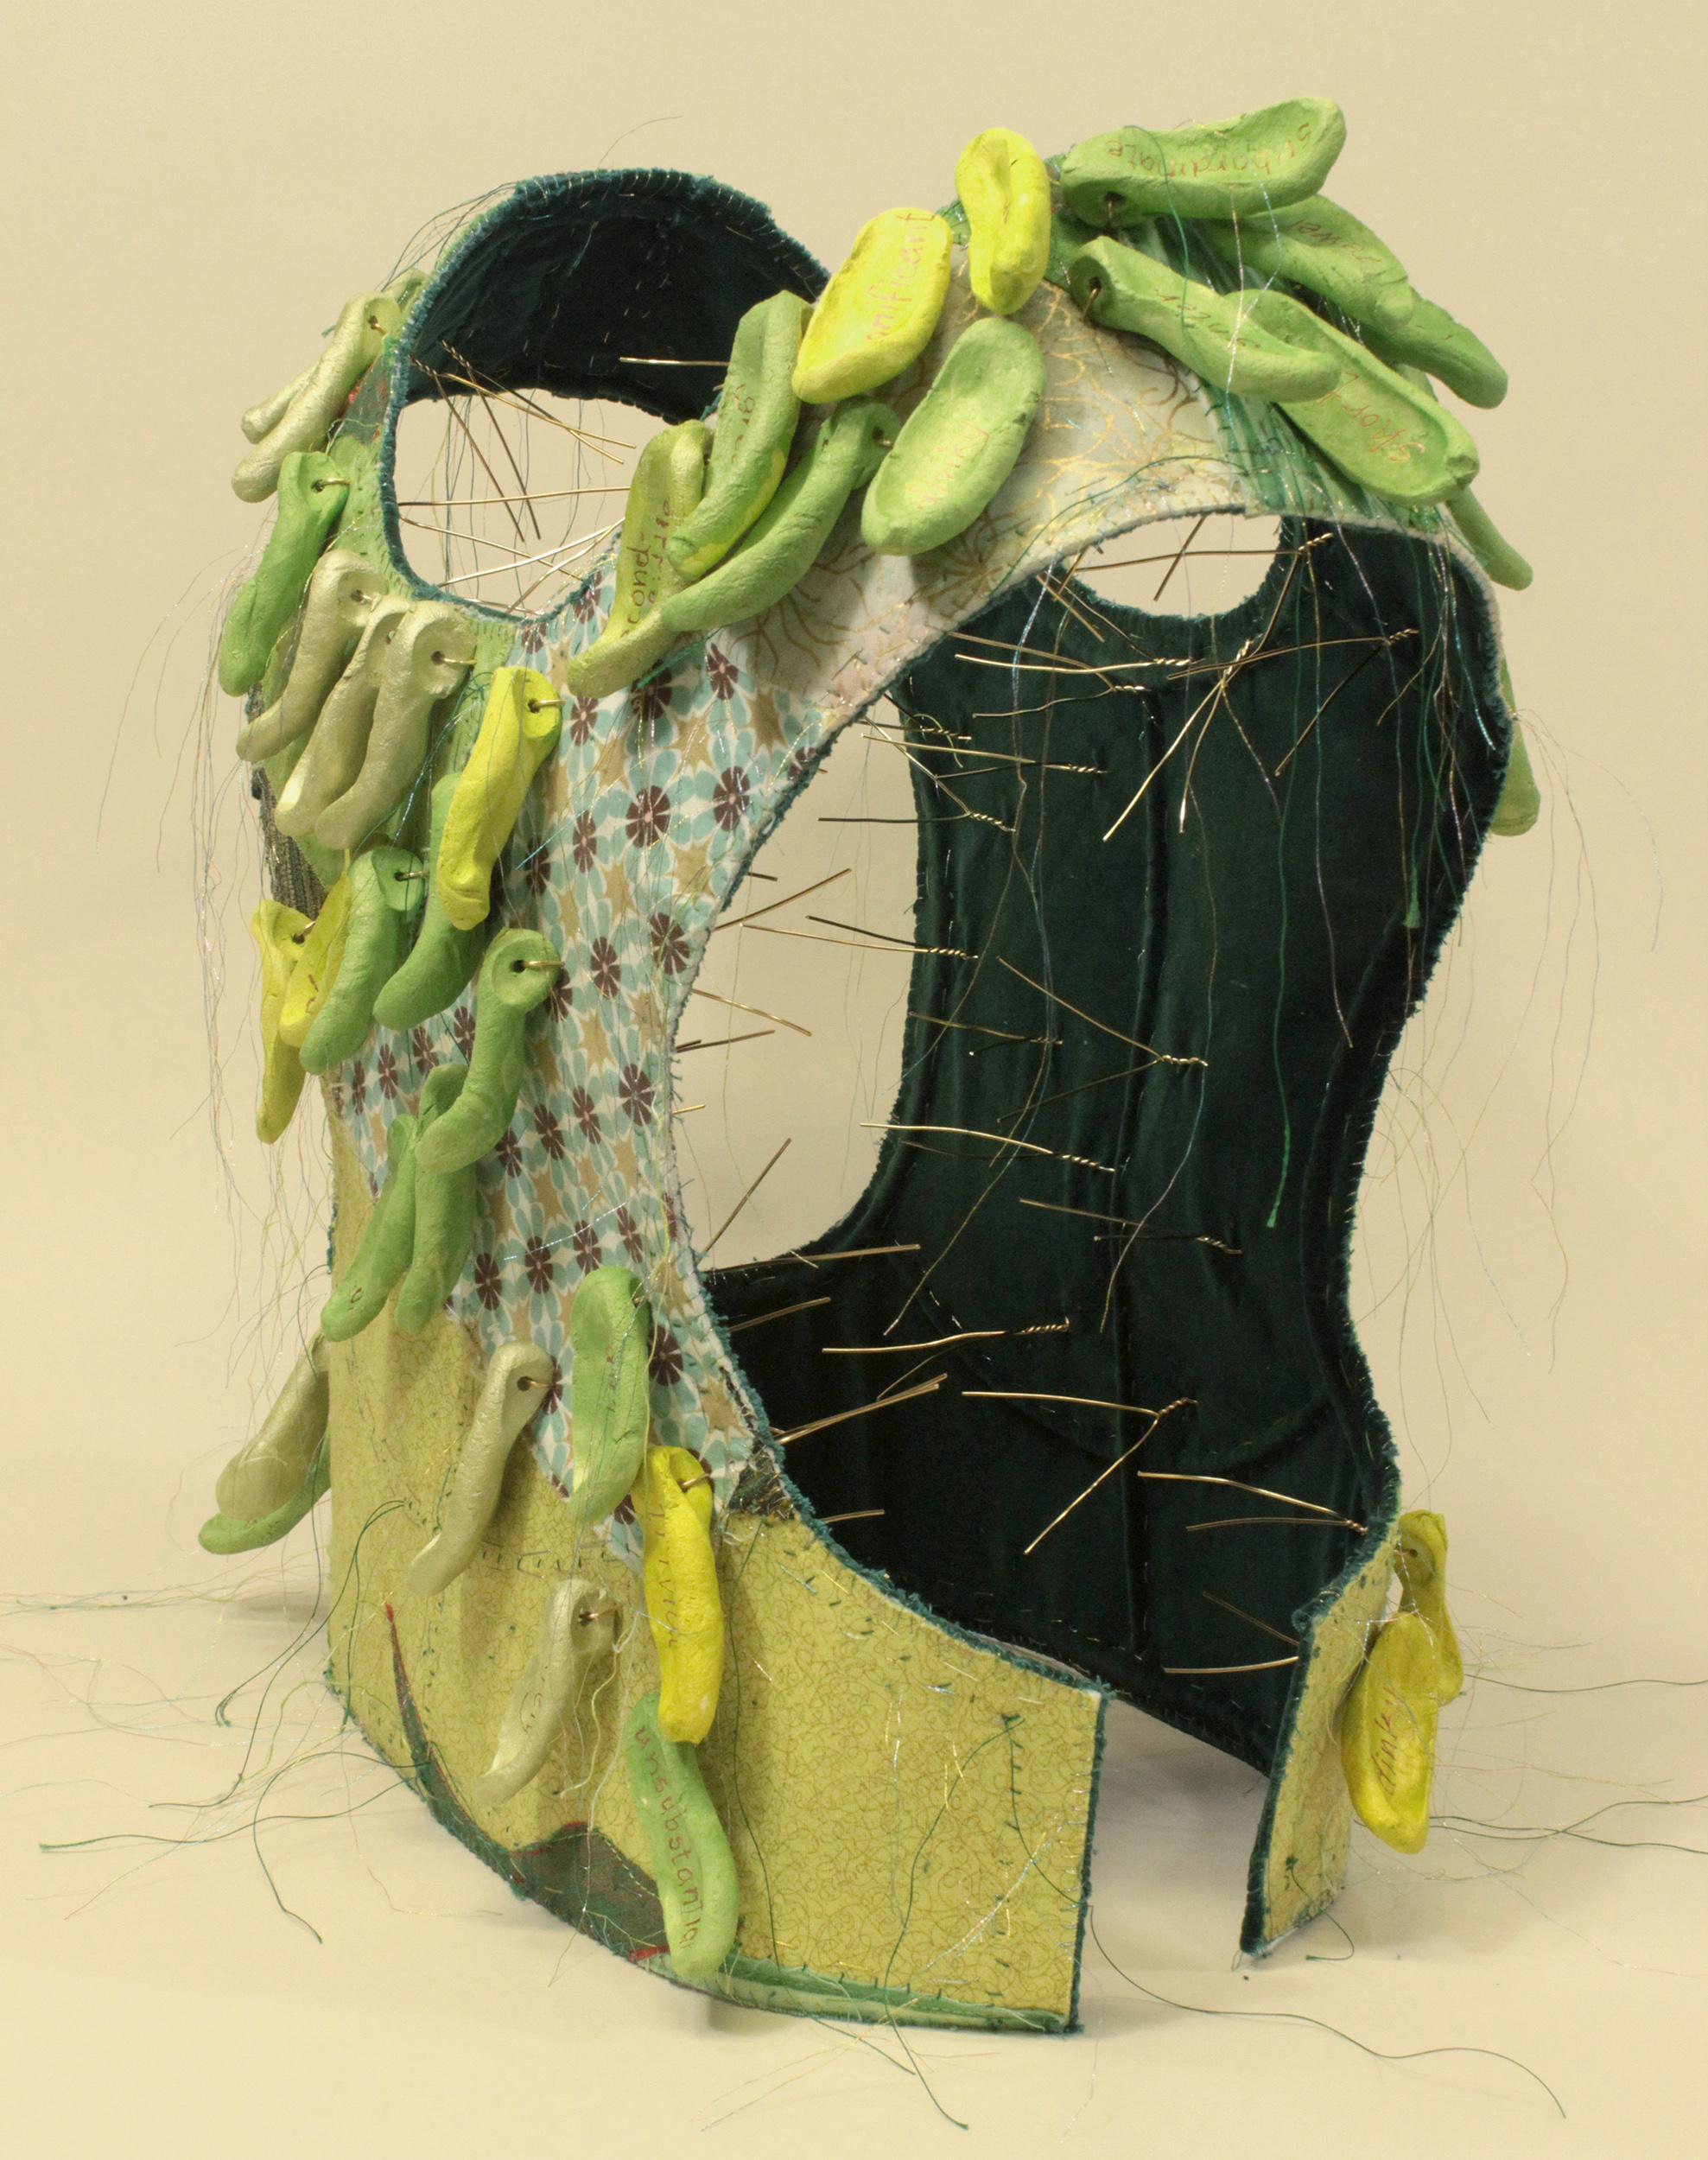 Virginia Mahoney’s “Less” is a mixed-media sculpture in vest form that is primarily green with many prints and variations, and has attached ceramic tags in shades of green, on which words, referring to being less than others, are handwritten in